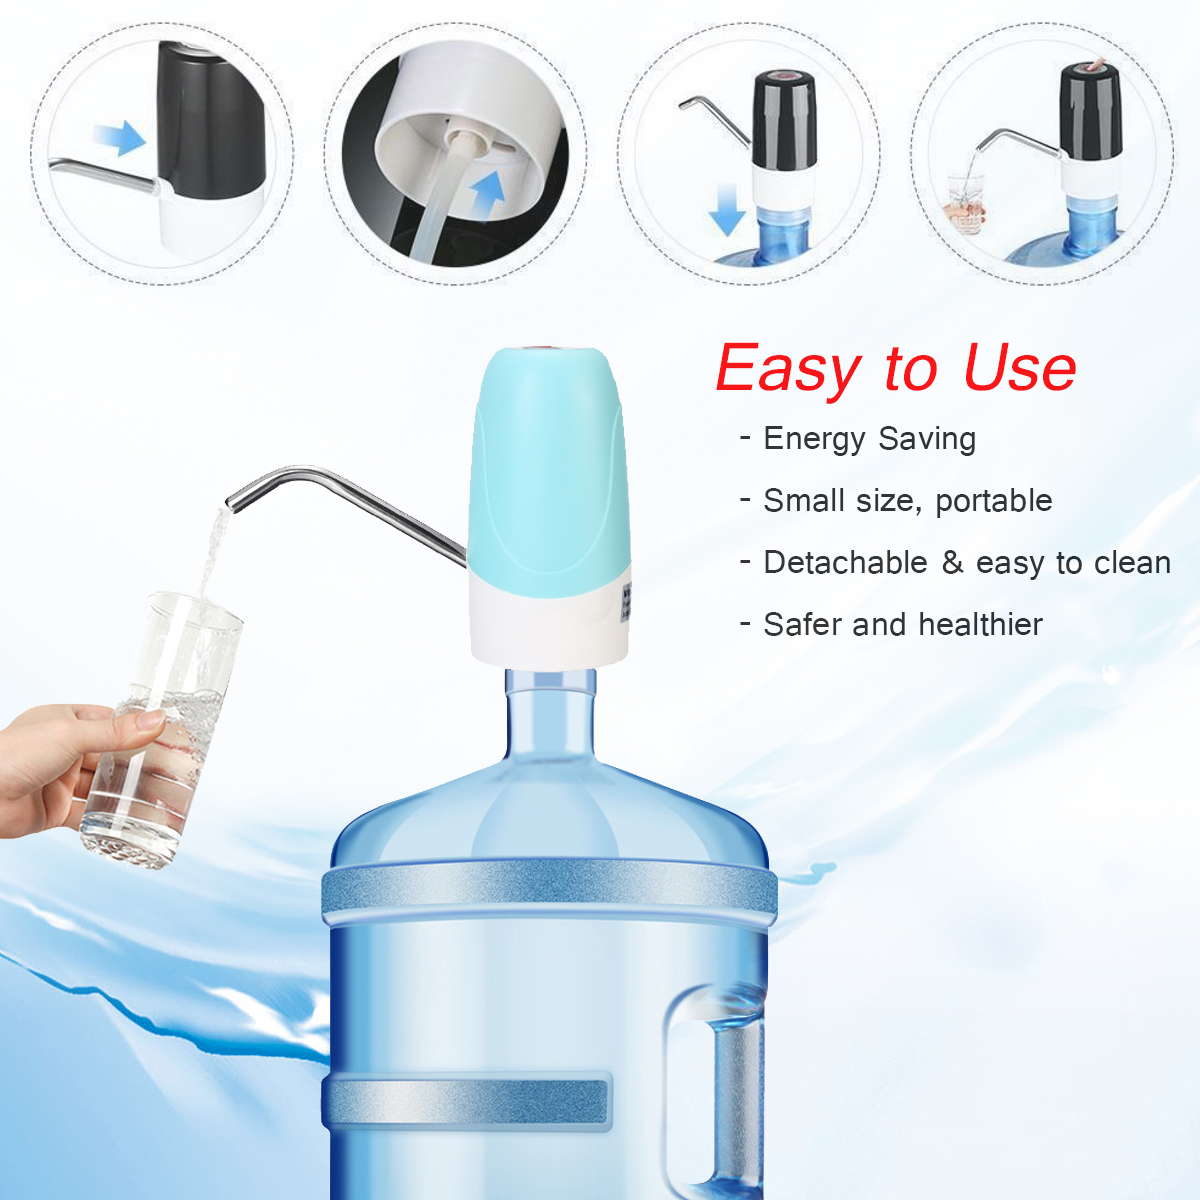 Automatic-Electric-Water-Pump-Dispenser-USB-Charging-Drinking-Bottle-Switch-Pump-1684971-5